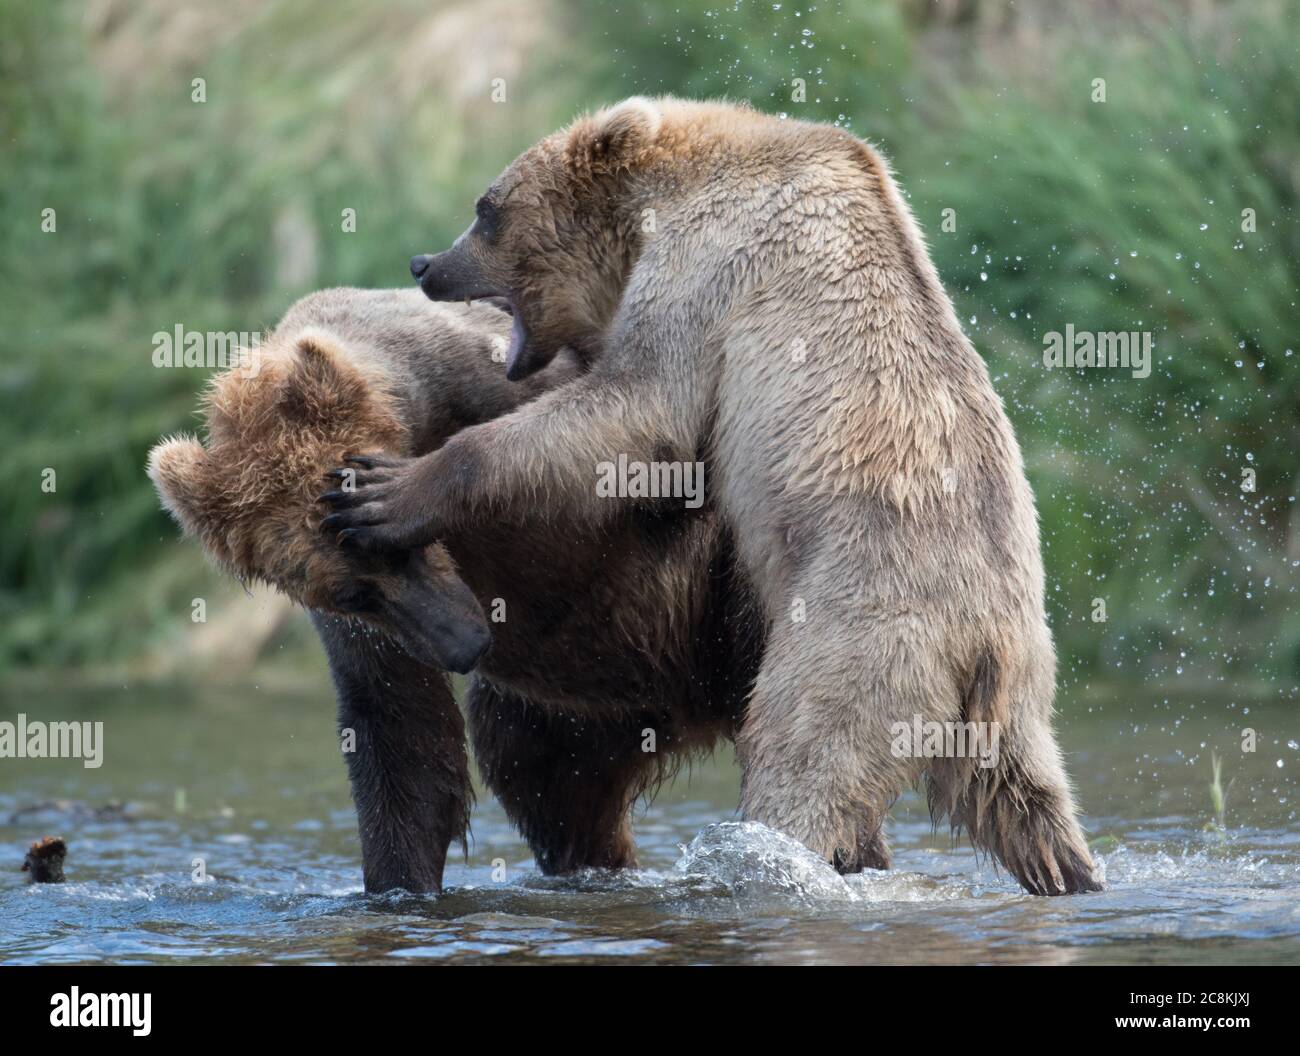 Two Alaskan brown bears sparring and fighting in the Brooks River in Katmai National Park, Alaska Stock Photo